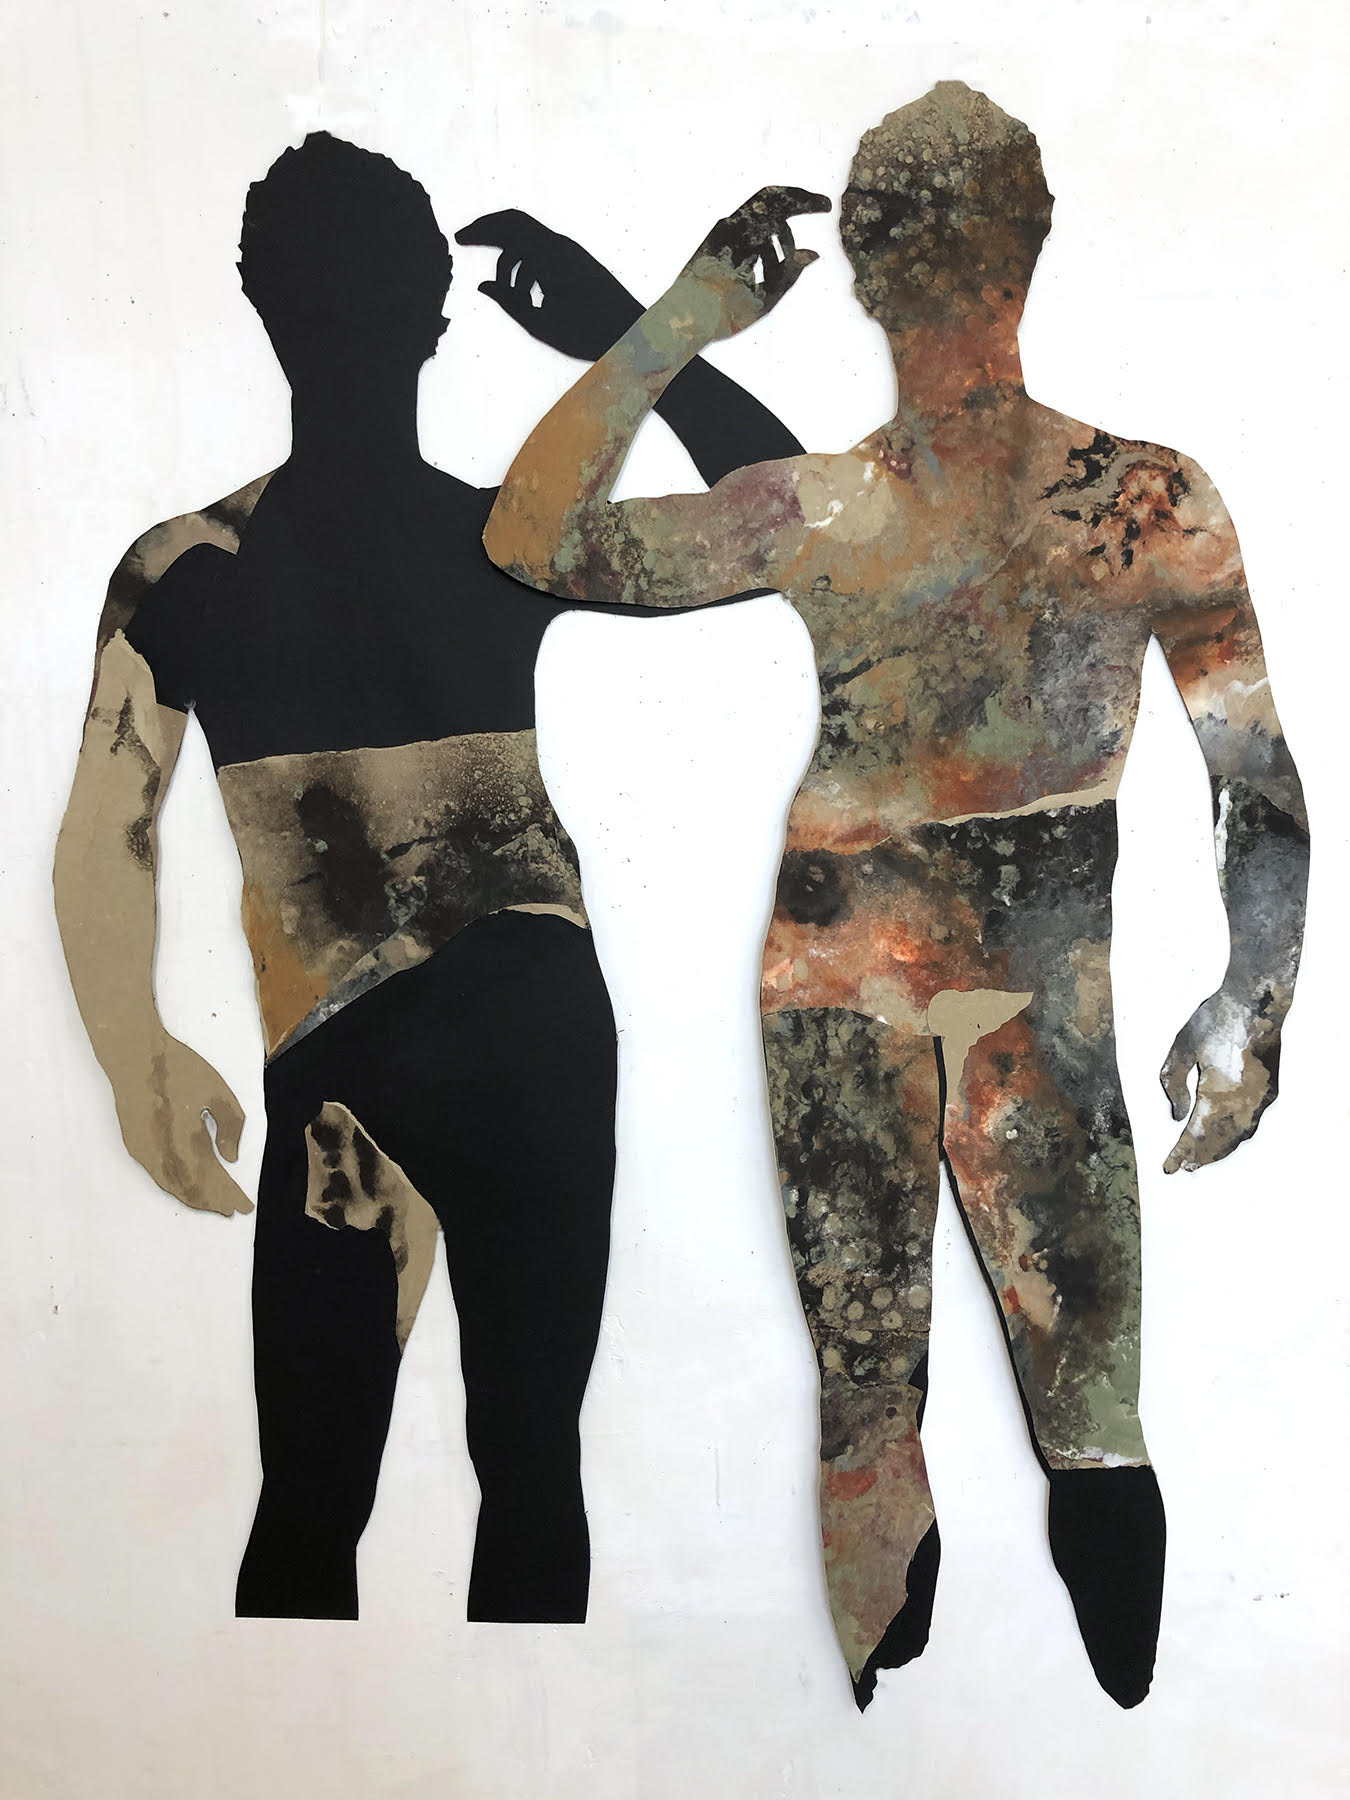 An art piece by Heebner depicting two people standing next to each other.